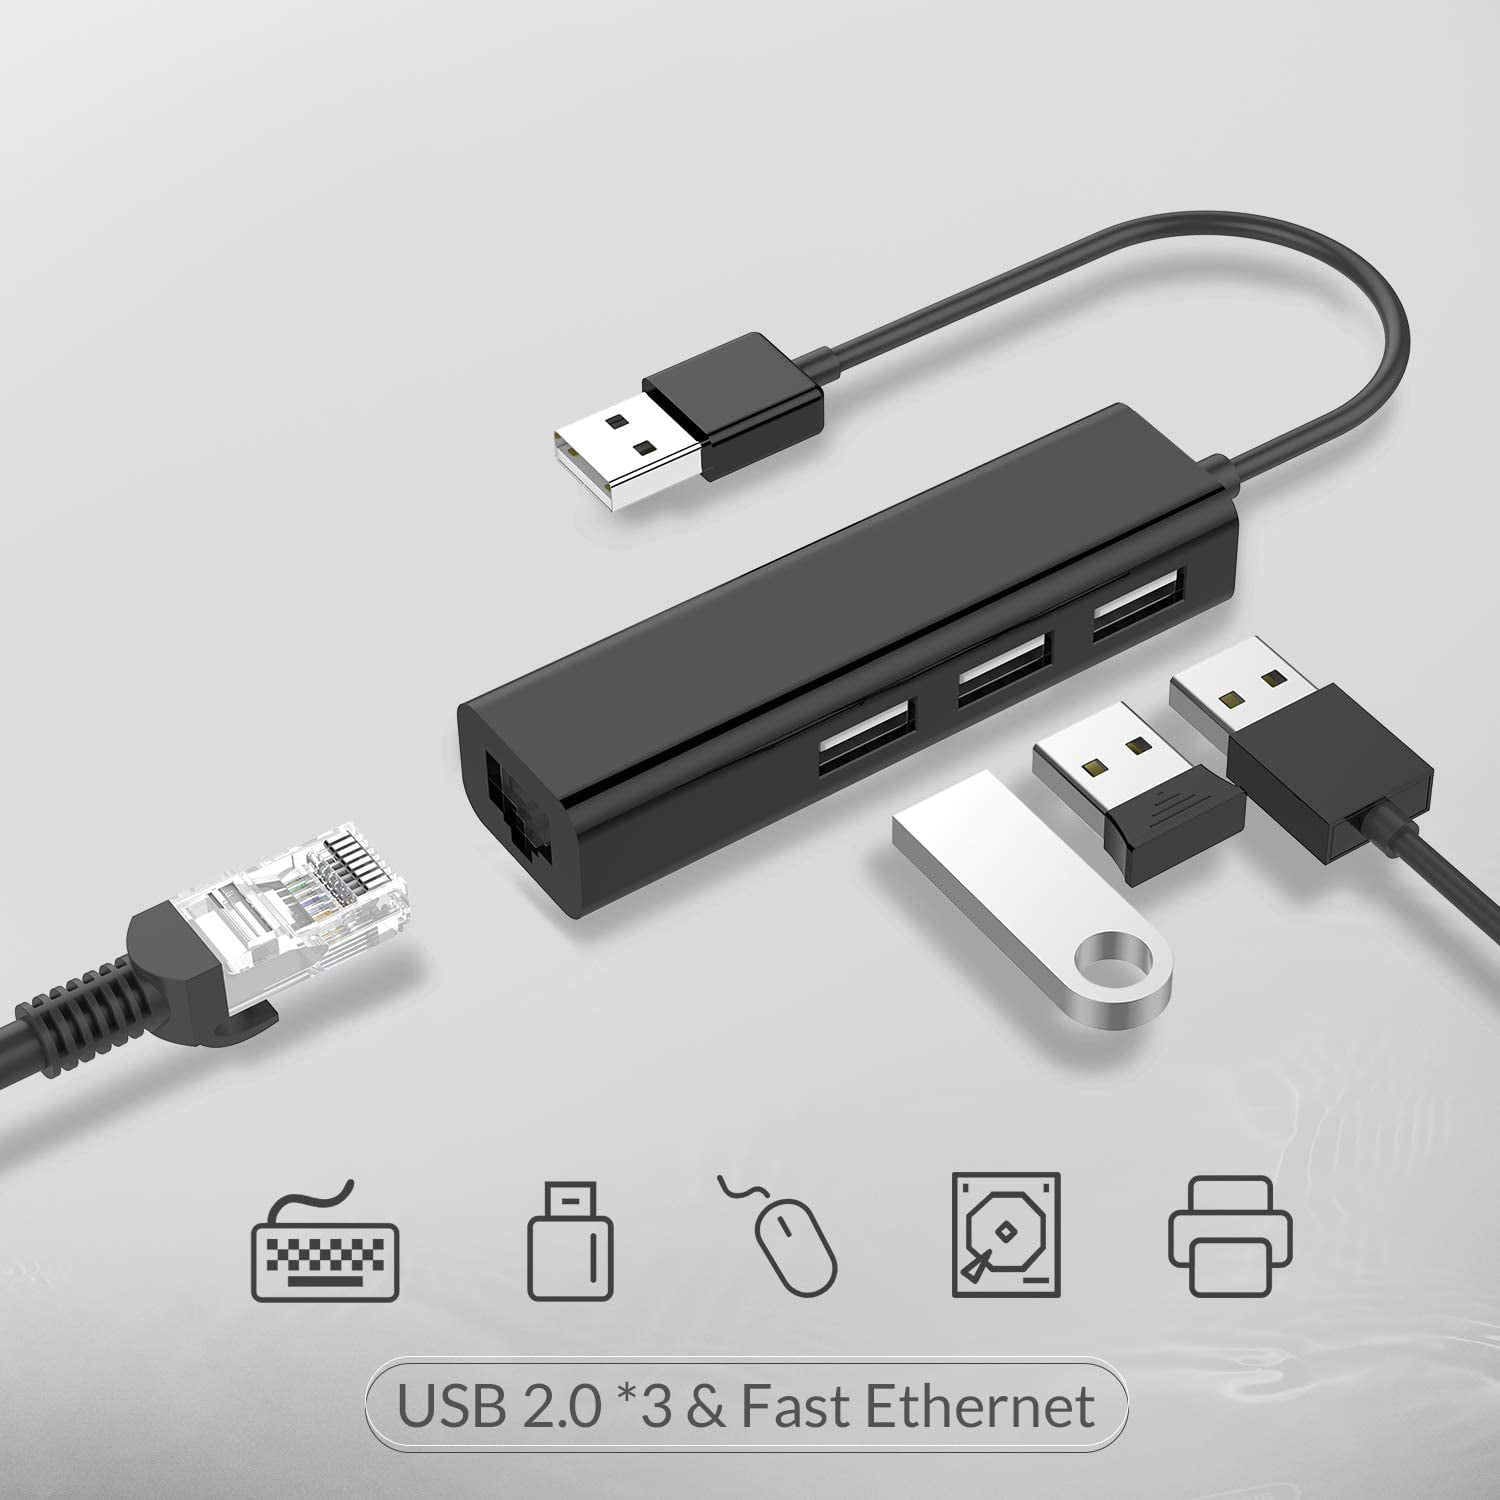 ChromeBook Pixel and More ICZI USB 3.1 Type C USB C to Ethernet Adapter to RJ45 Gigabit Ethernet LAN Network Aluminum Adapter Compatible with the New MacBook Dark Grey Thunderbolt 3